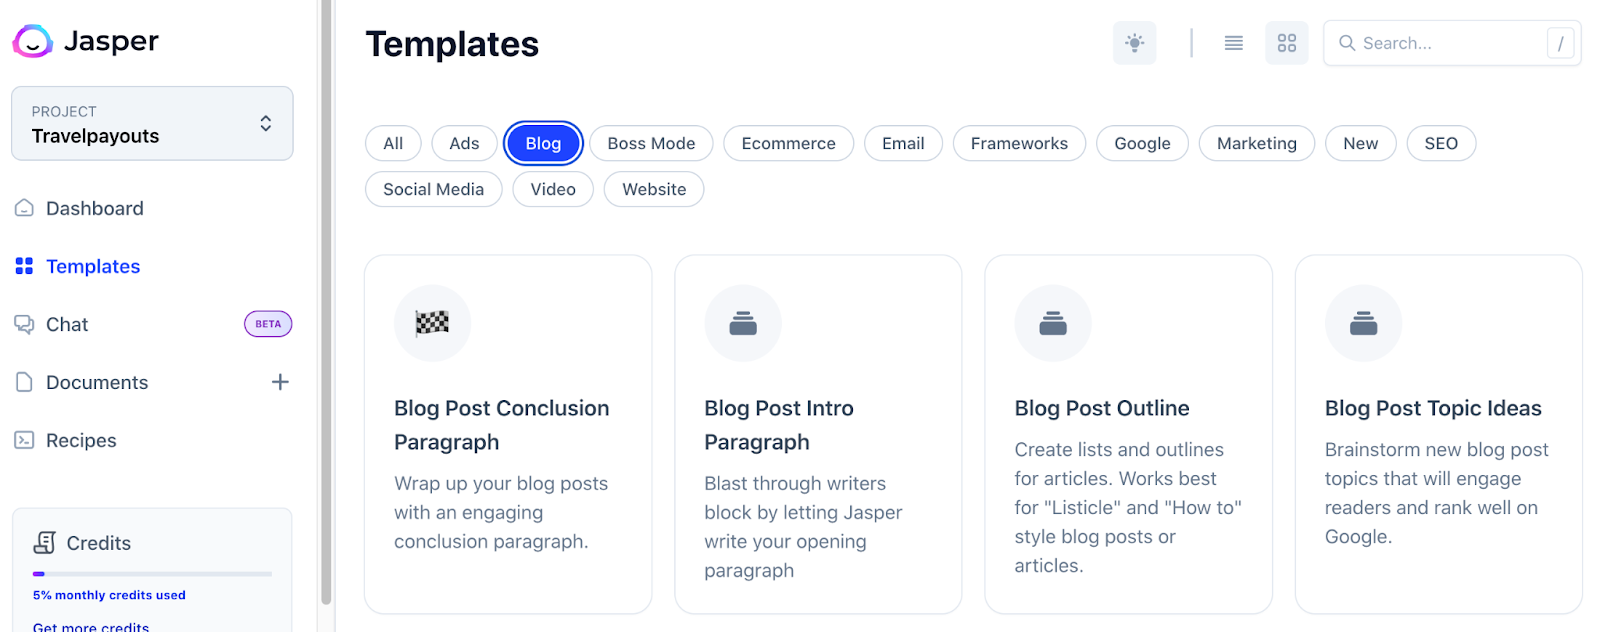 The image displays a webpage on Jasper AI for blog content generation. Shown are four templates to develop Blog Post Conclusion Paragraphs, intro paragraphs, outlines, and topic ideas.